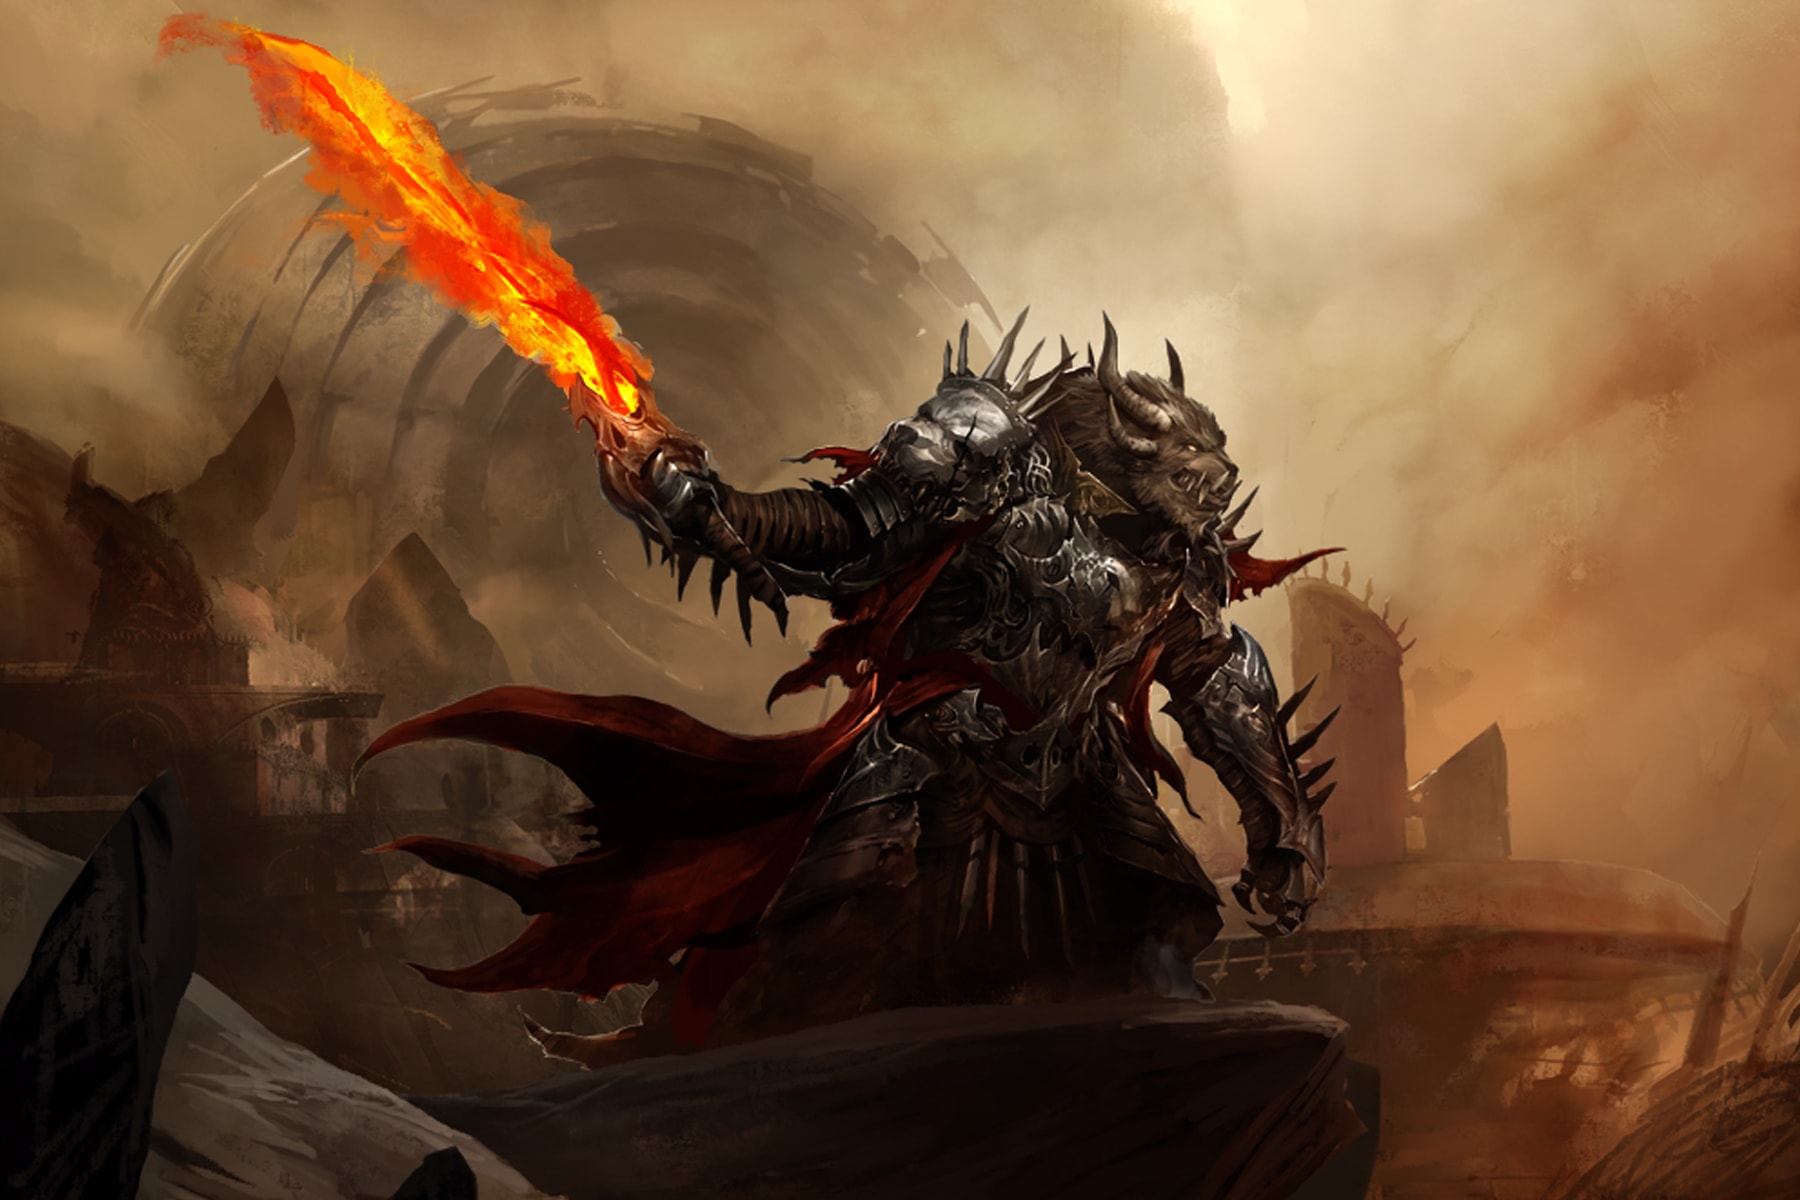 Illustration of Guild Wars 2 character Rytlock brimstone, a huge creature wielding a fiery sword amid smoking ruins